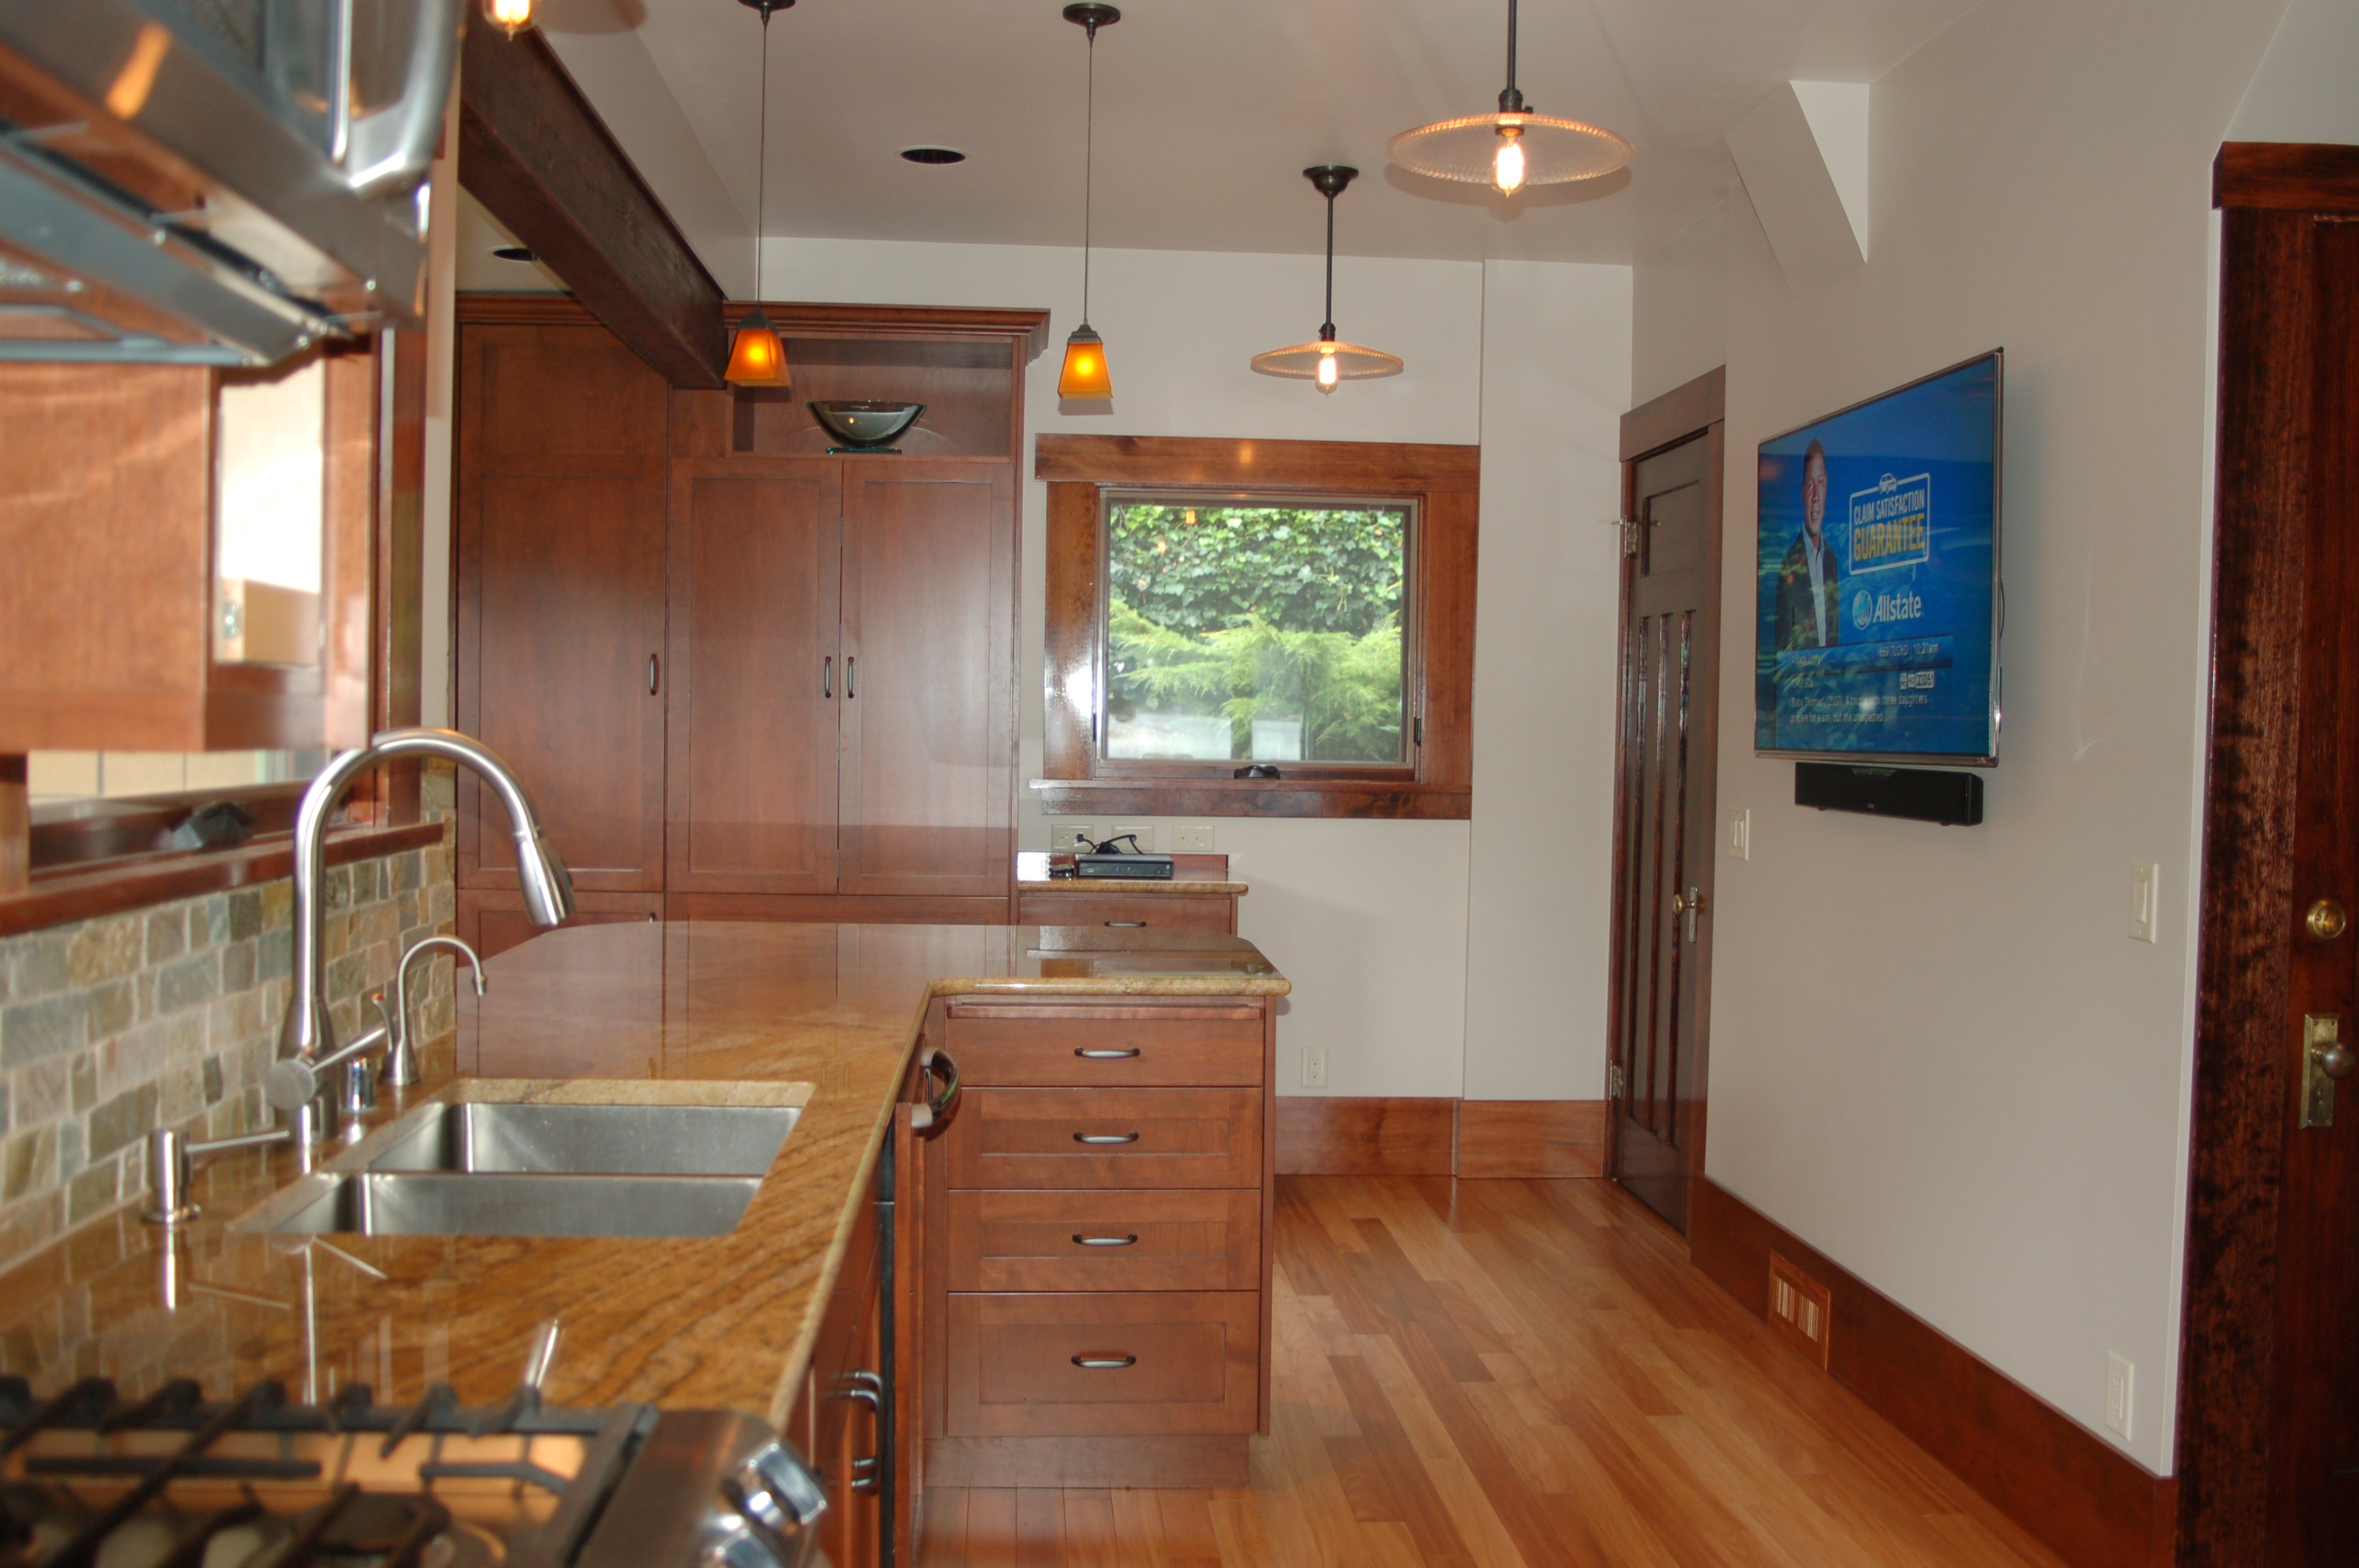 Recent complete kitchen remodel in Bellingham, showing 2 compartment kitchen sink and single handle faucet